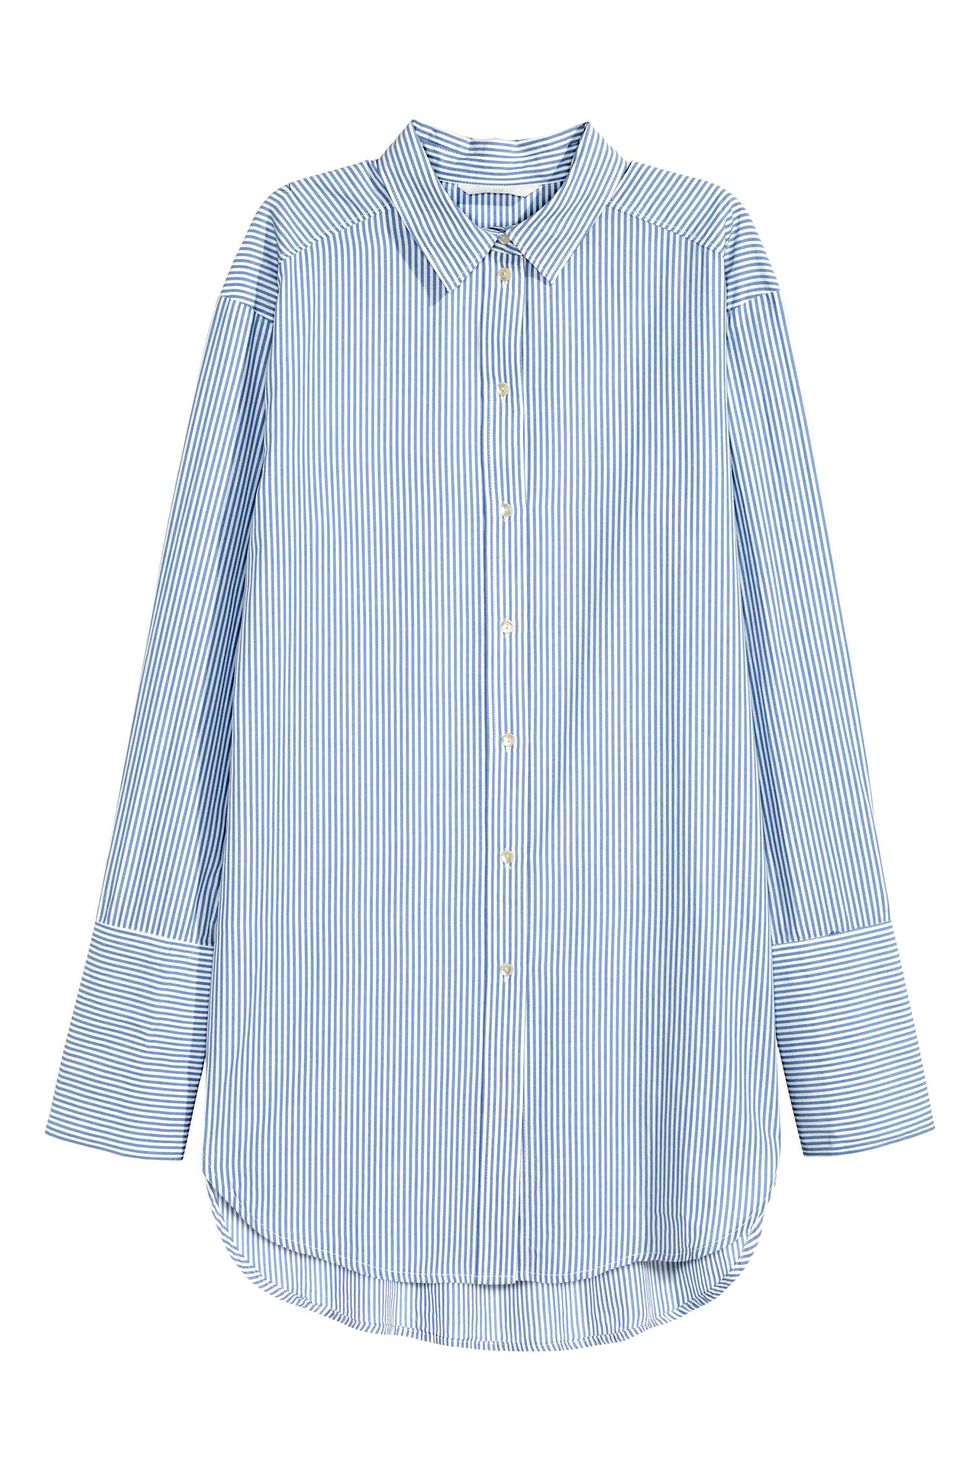 <p>Le <strong>camicie destrutturate</strong>, come questa di <strong>H&M</strong>, sono di <strong>tendenza</strong> in questa stagione. </p><p><strong>Camicia oversize</strong> a righe, H&M</p>